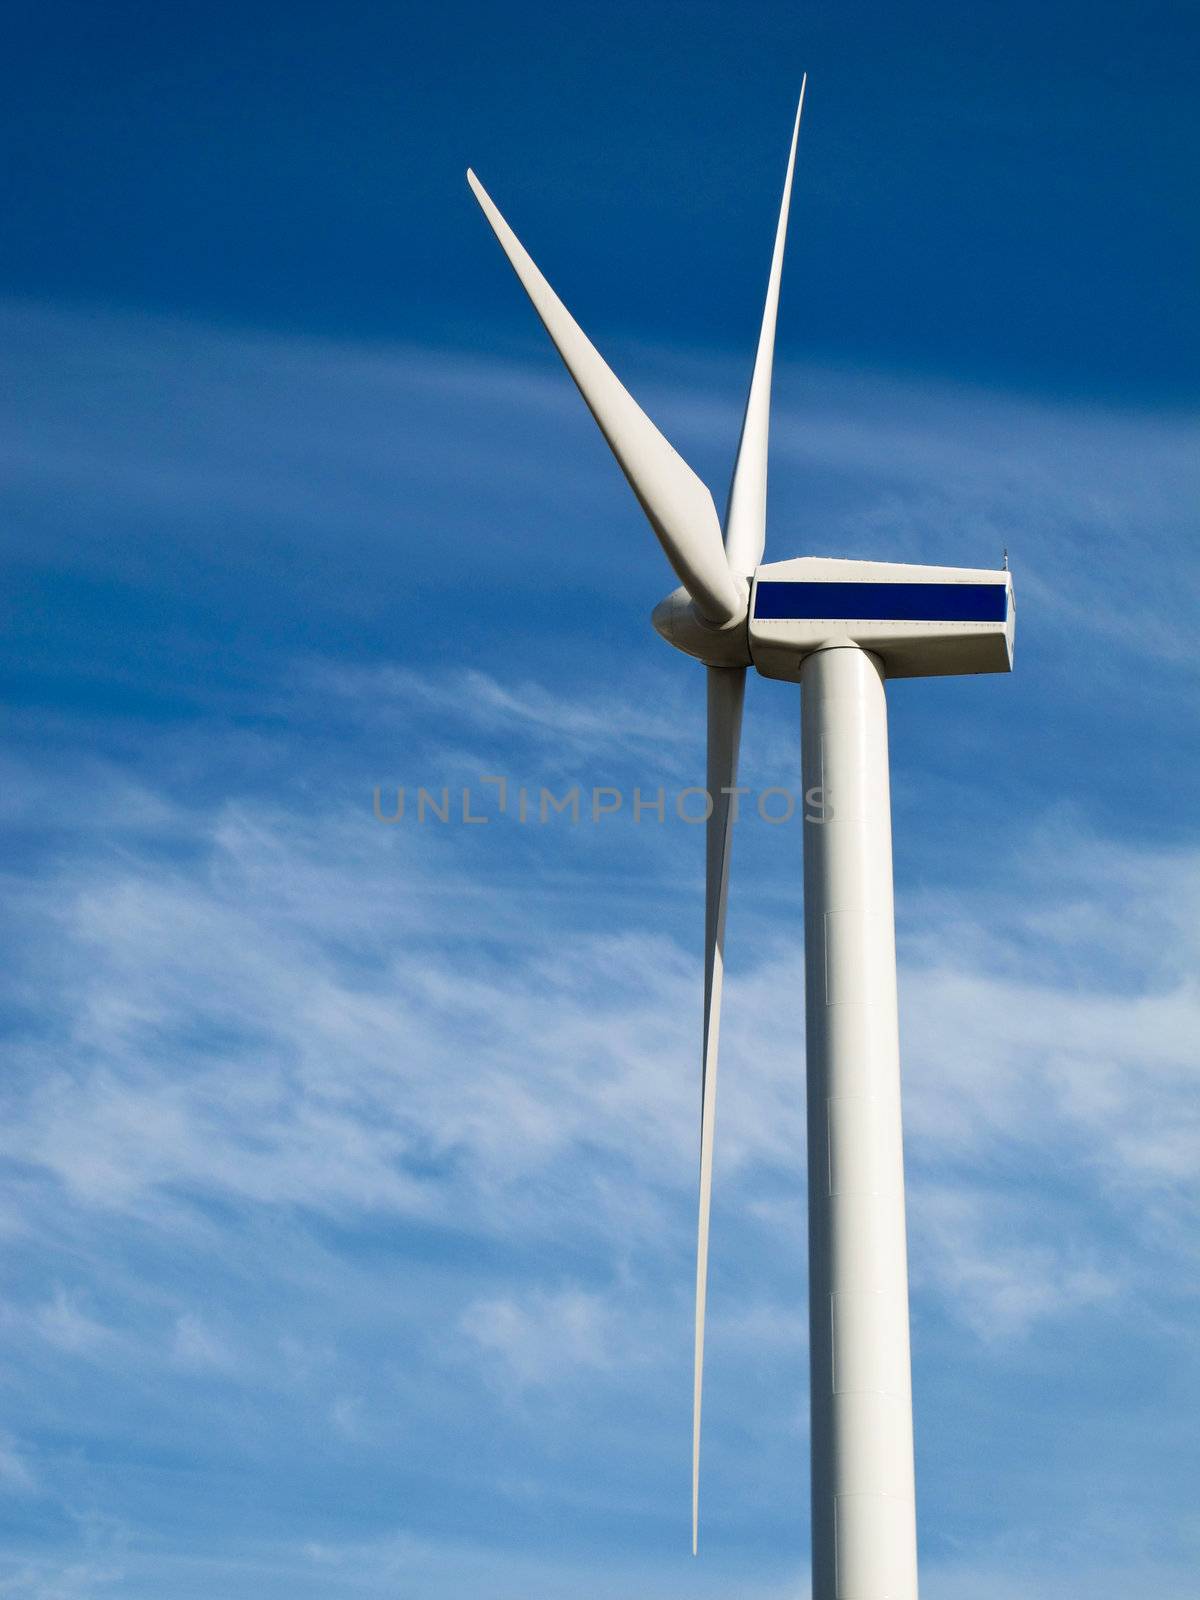 wind turbine seen from the side against blue sky with light clouds